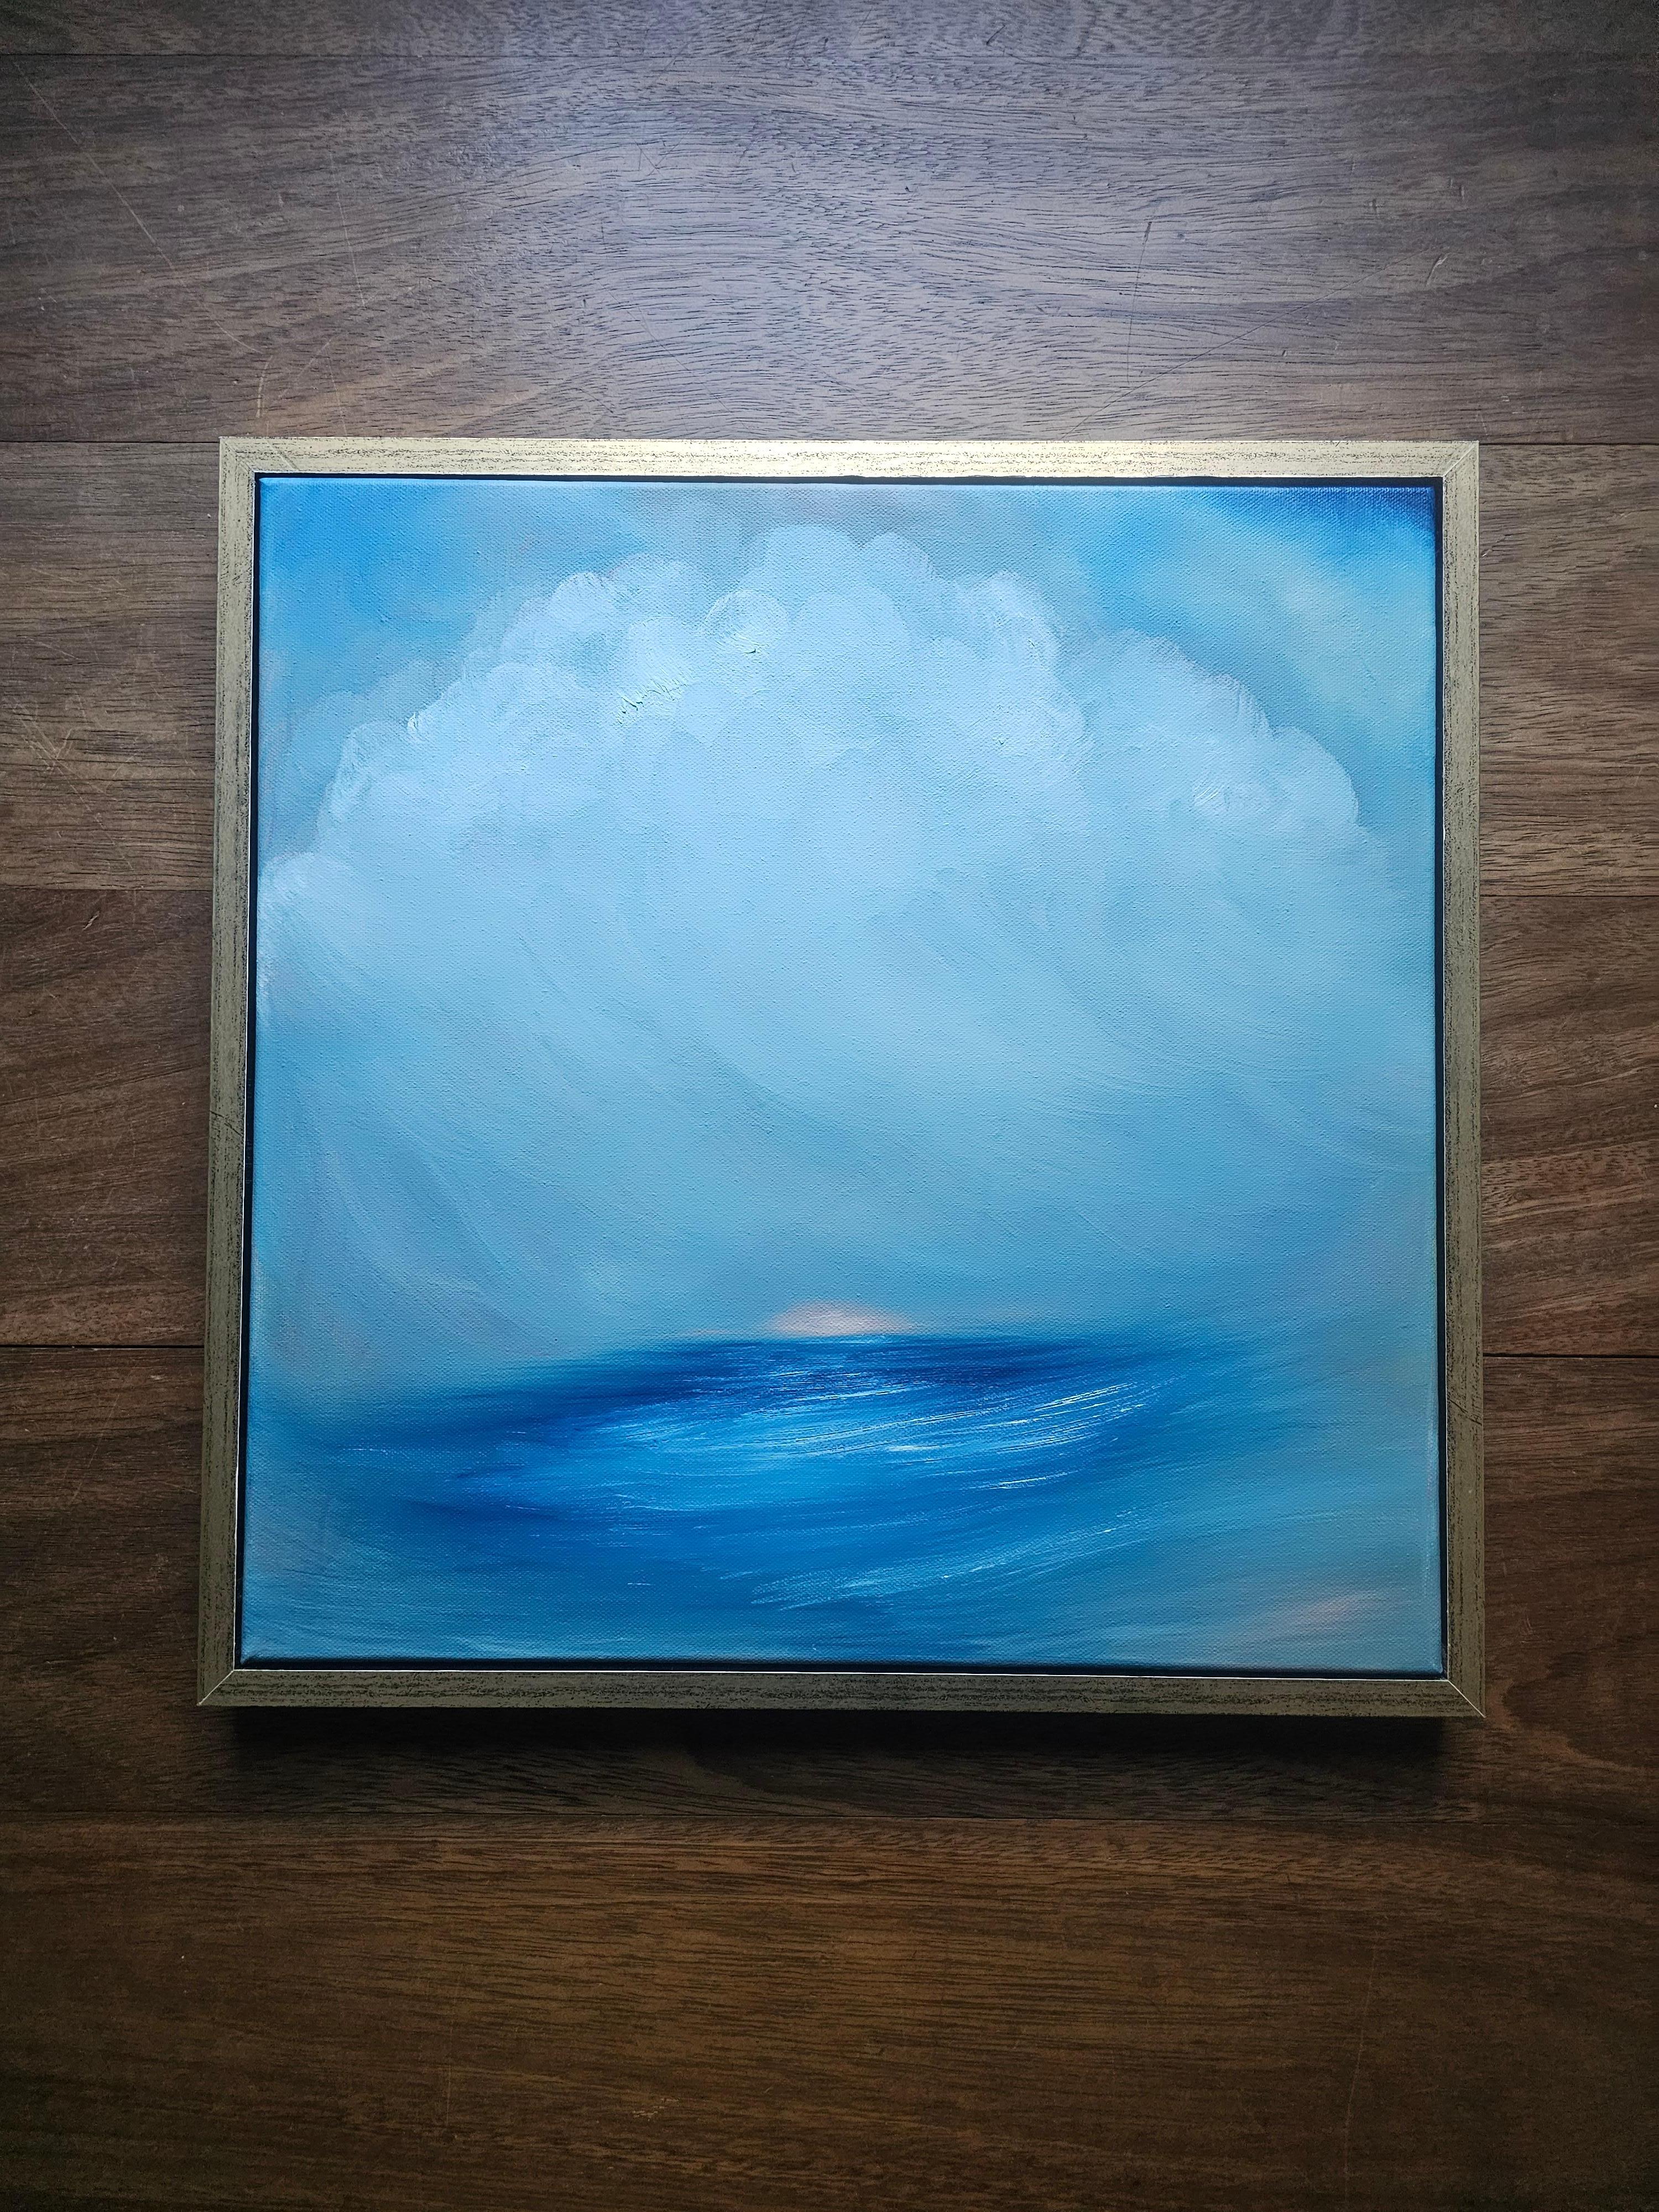 Sailing on the astral plane - Framed abstract blue seascape painting - Abstract Impressionist Painting by Jennifer L. Baker